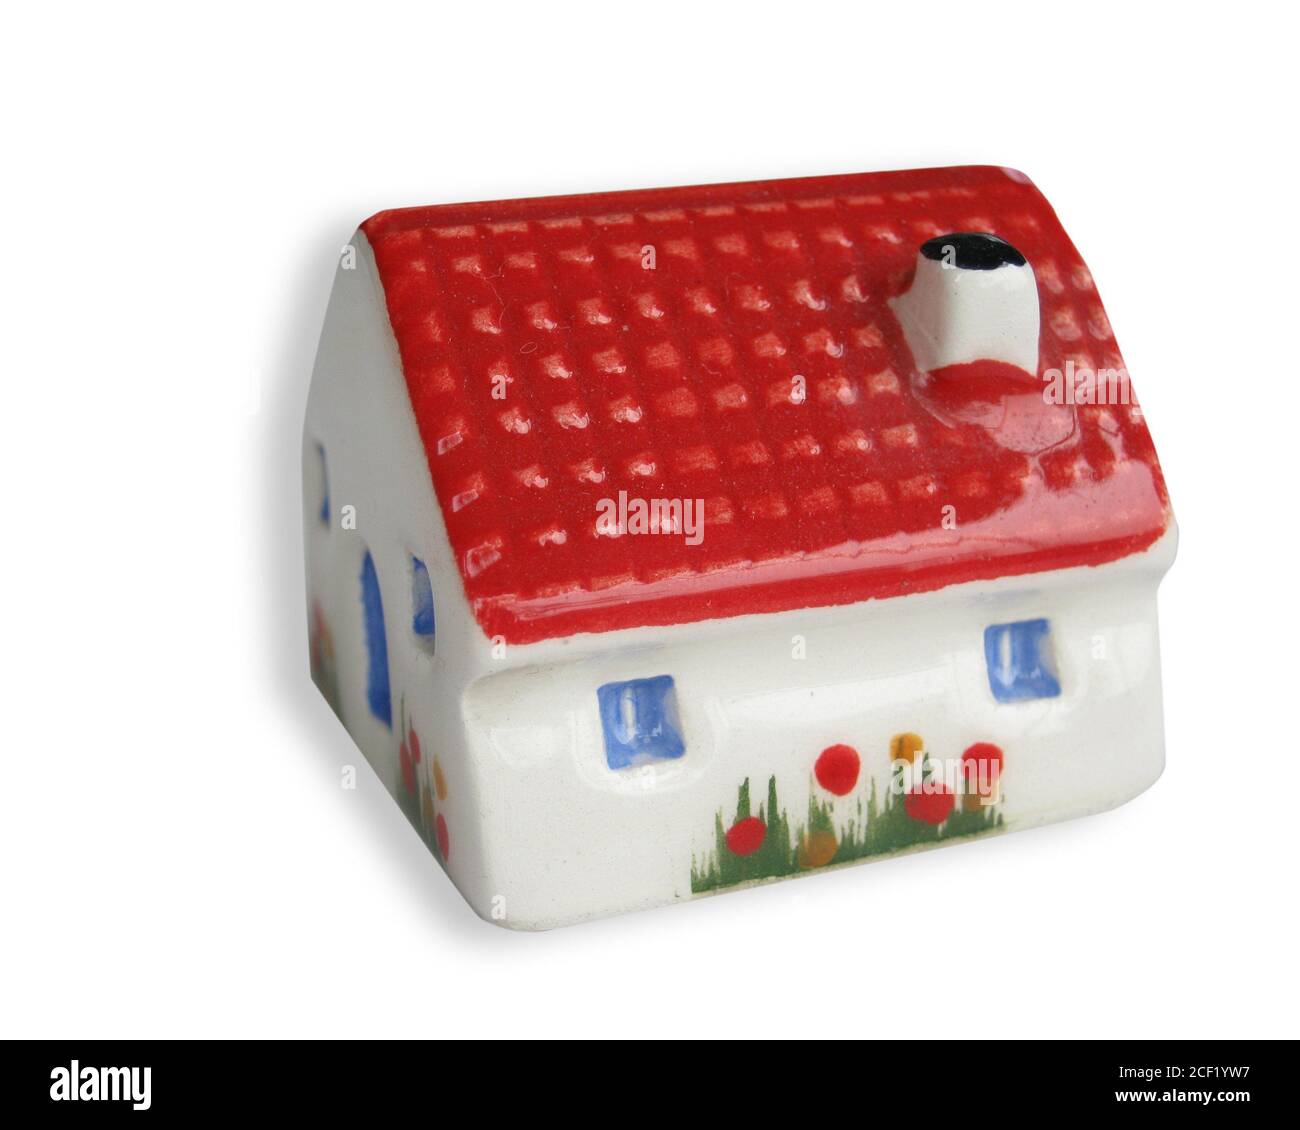 handcrafted souvenir of house made in ceramic. Stock Photo